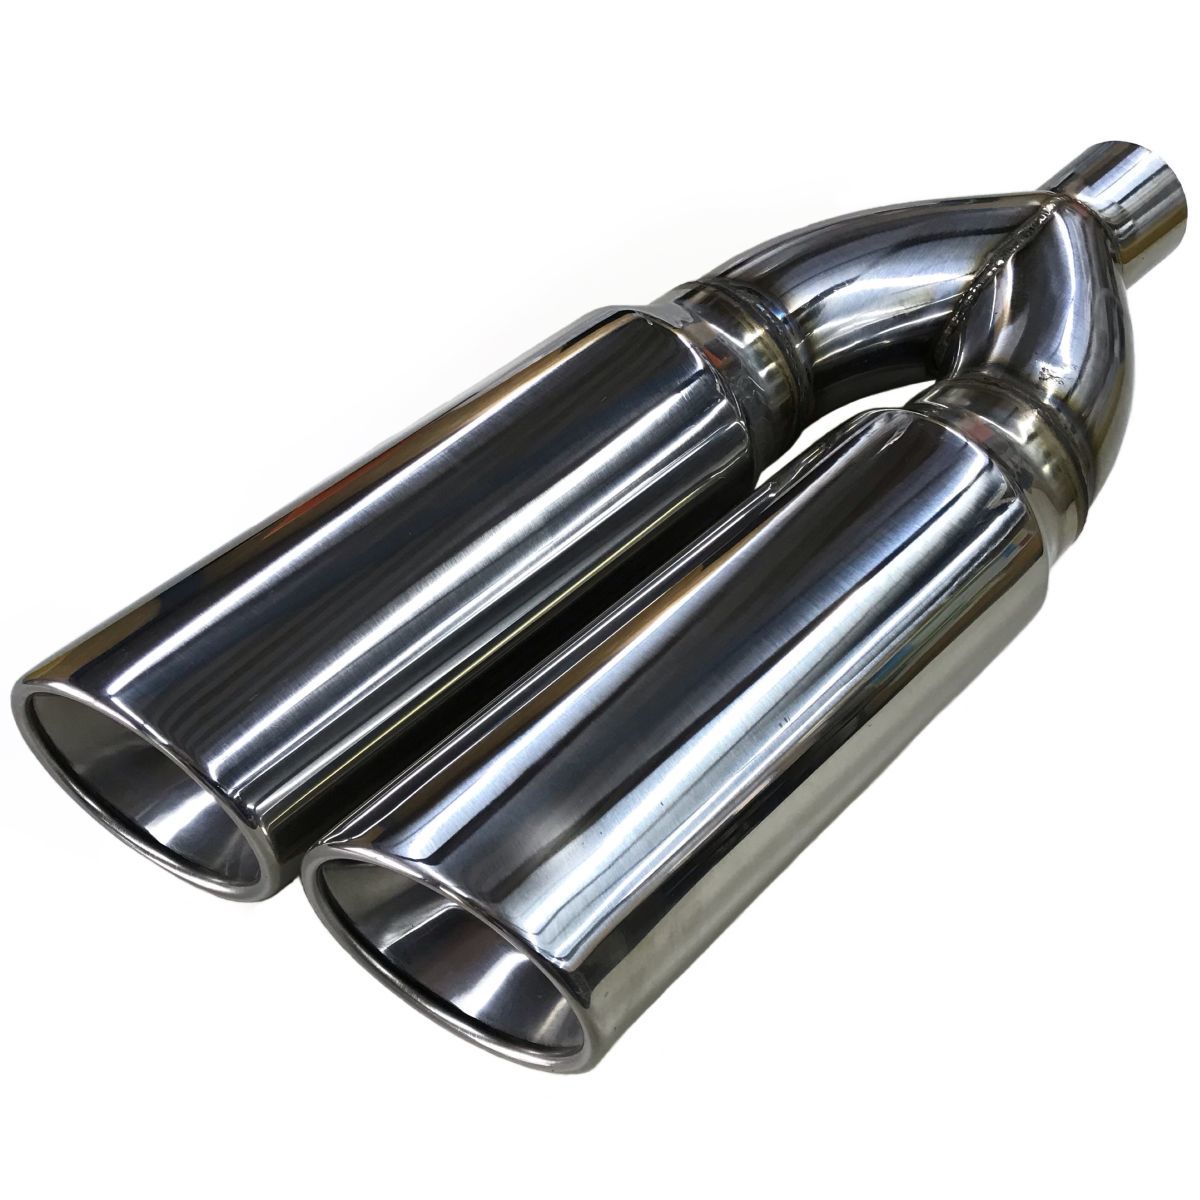  tax included 24038DSfla- chip muffler cutter muffler end stainless steel polish dual Tundra Sequoia FJ Cruiser prompt decision immediate payment 